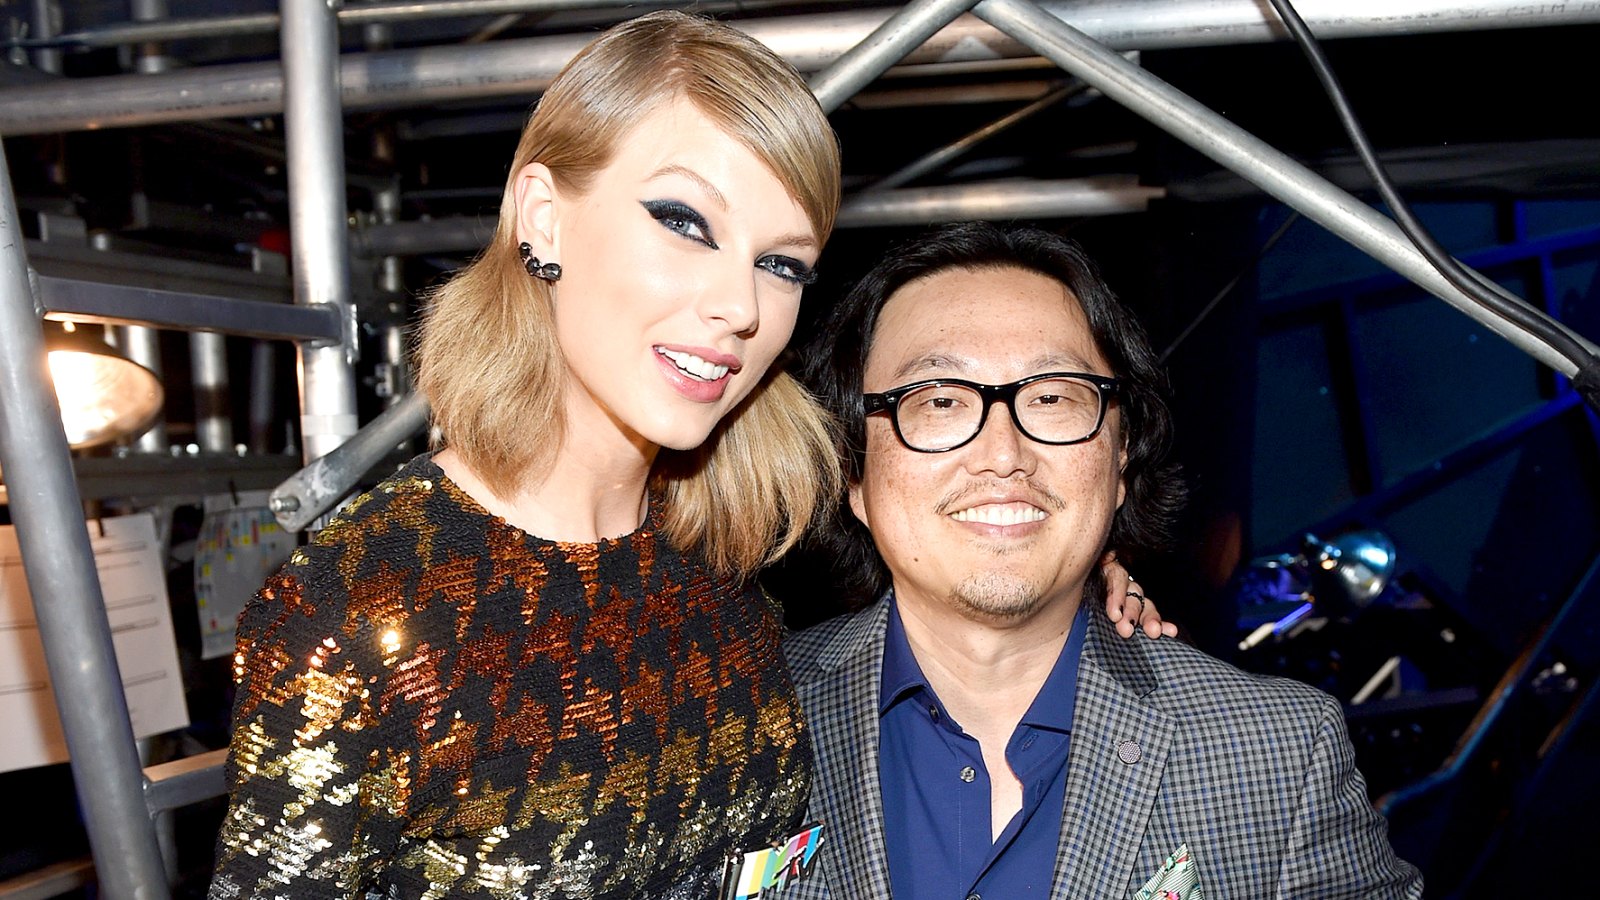 Taylor Swift and director Joseph Kahn pose backstage during the 2015 MTV Video Music Awards at Microsoft Theater on August 30, 2015 in Los Angeles, California.